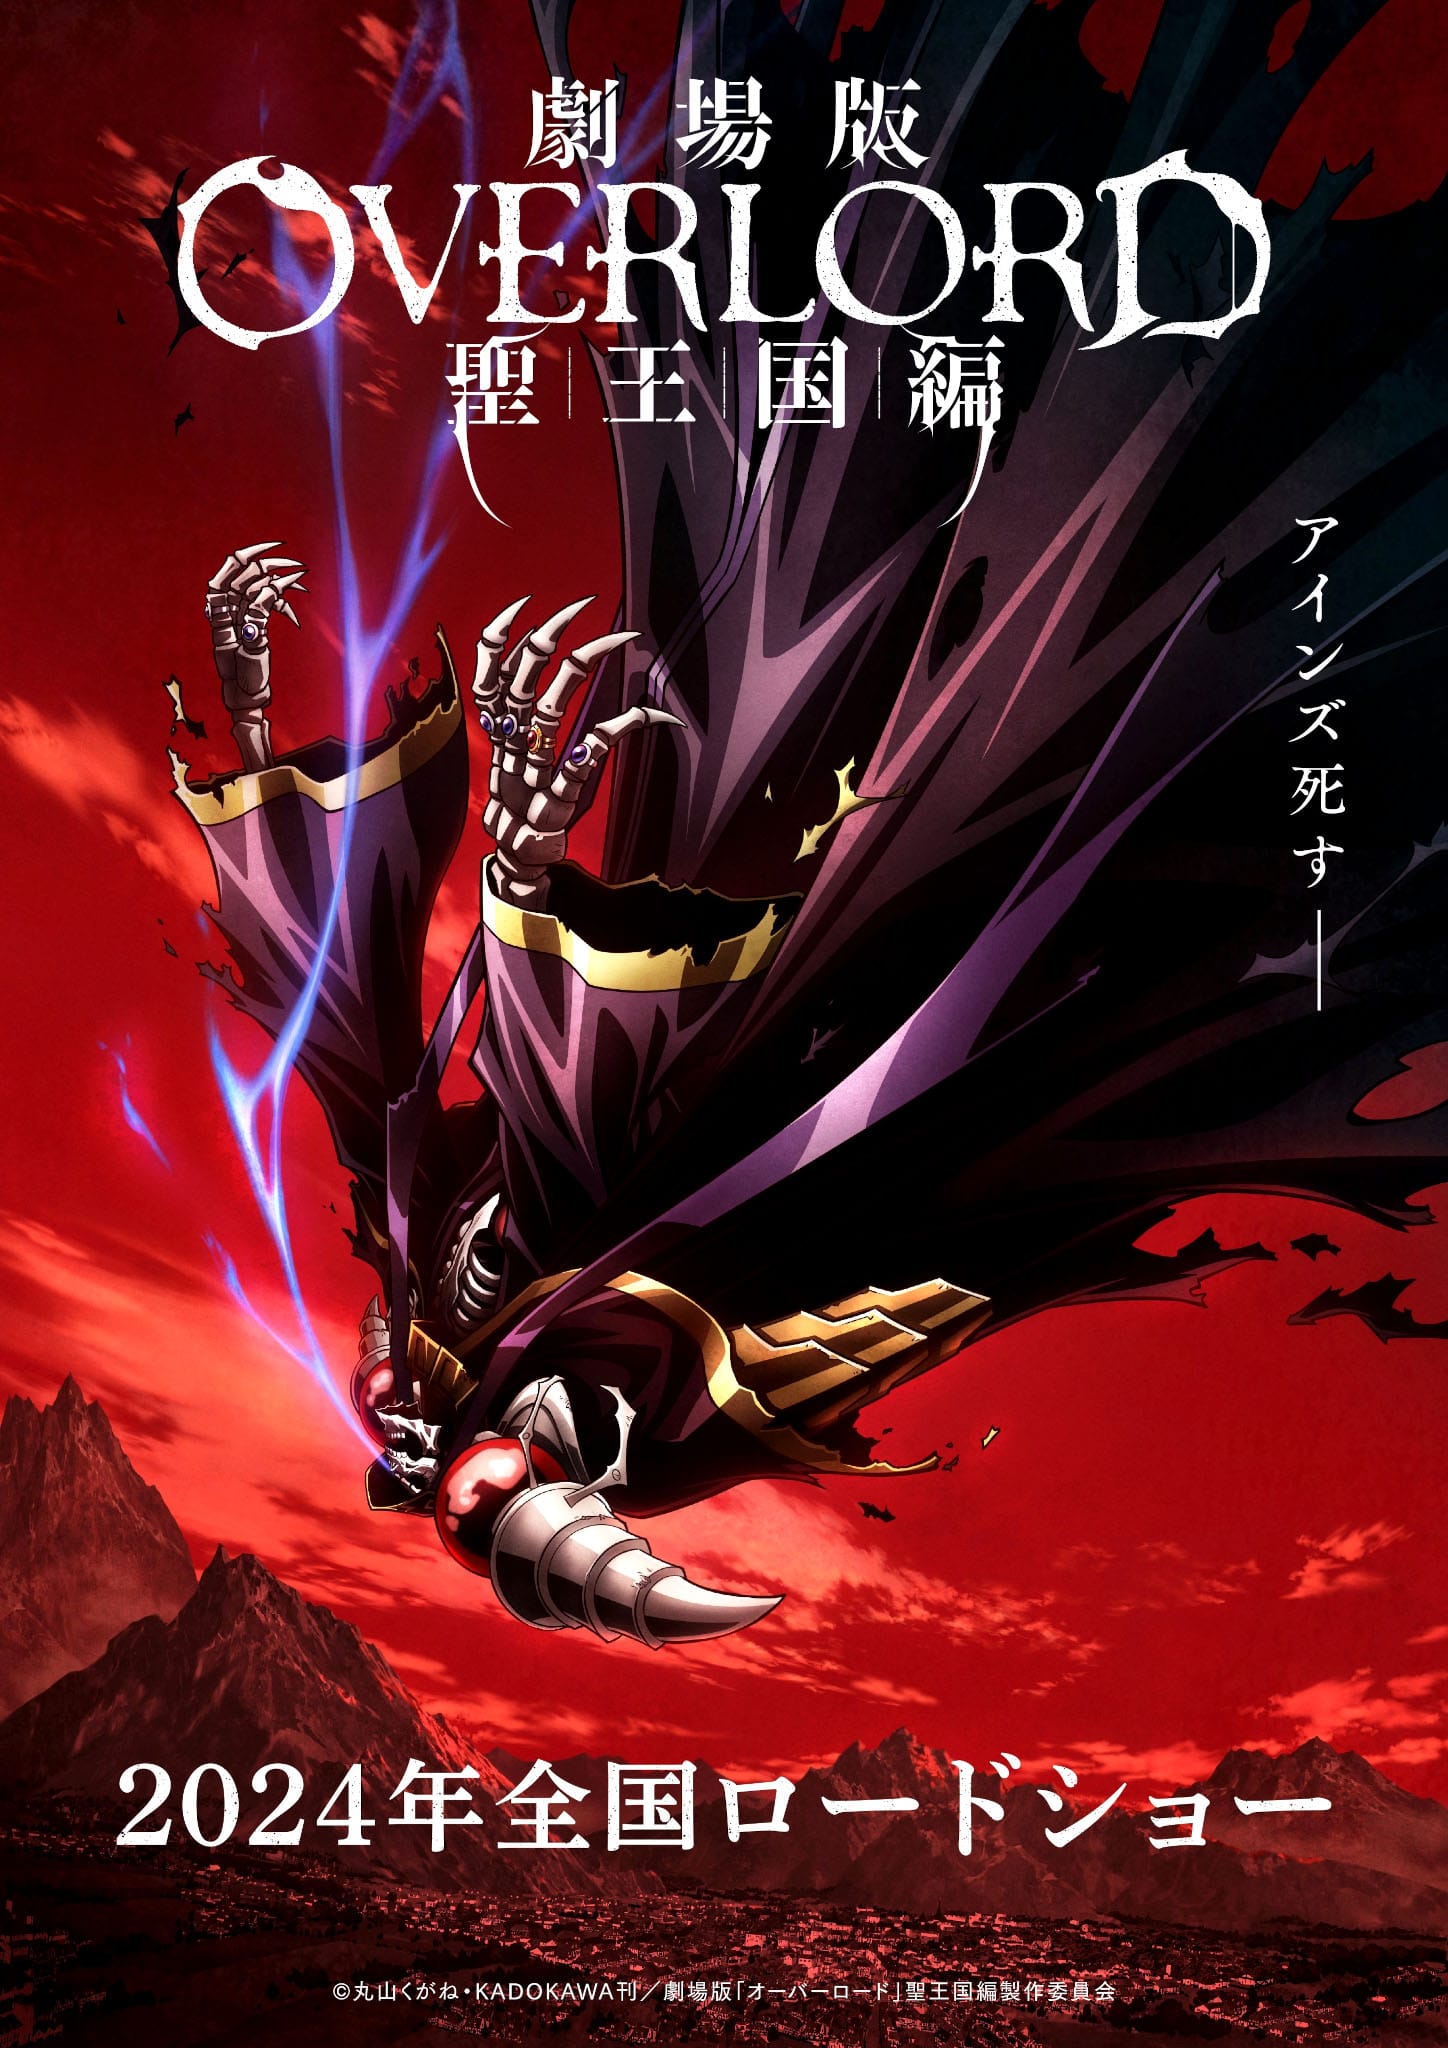 Second visuel pour le film OVERLORD : The Holy Kingdom.